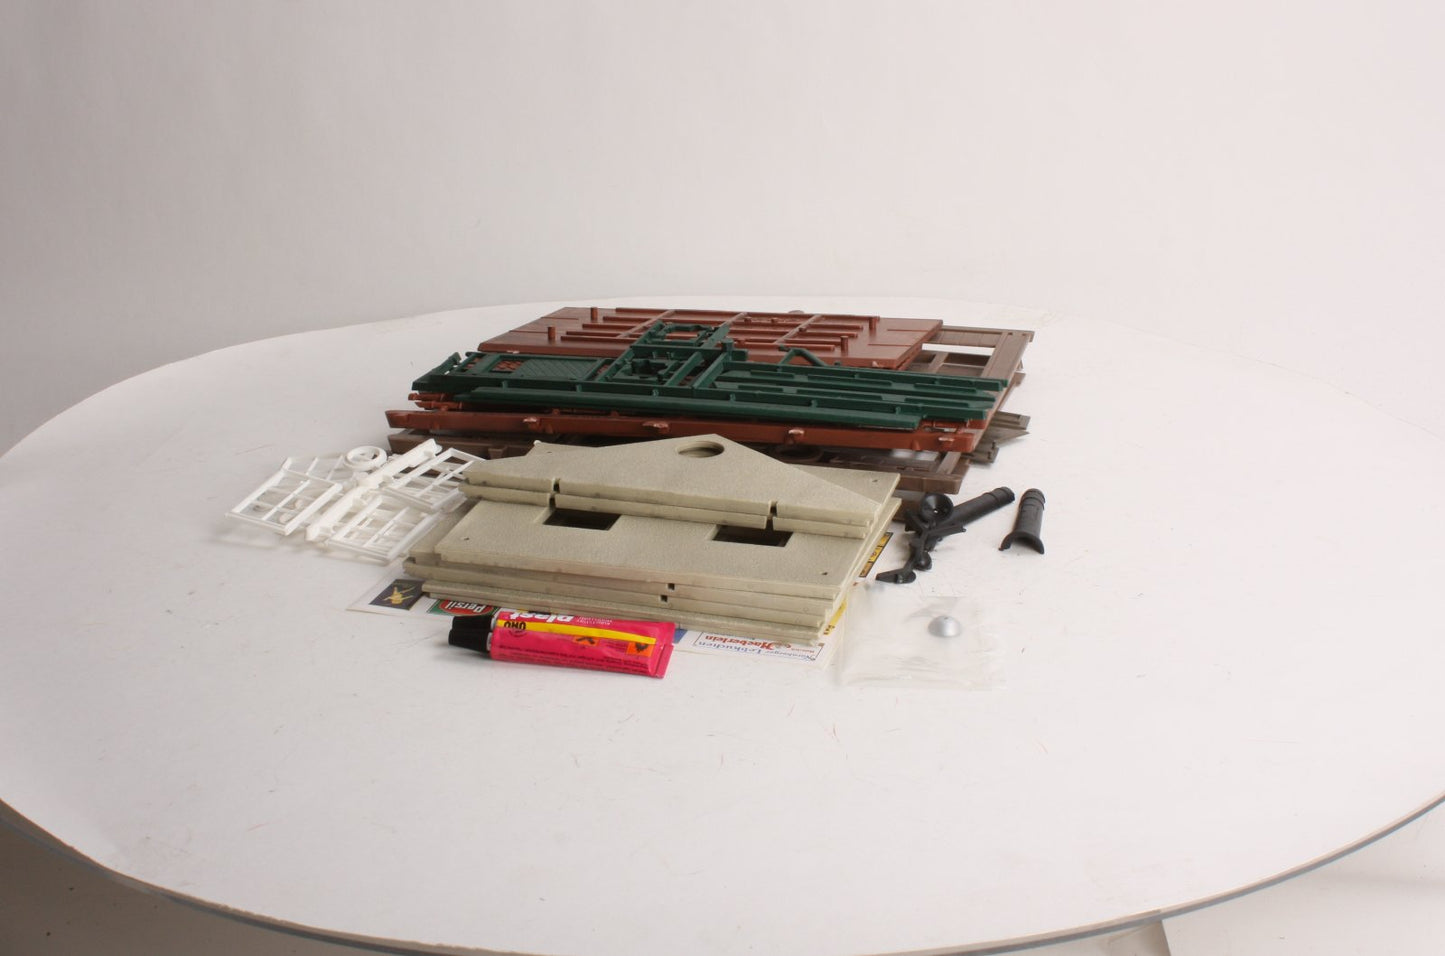 Piko 63002 G Scale Crossing Keepers House